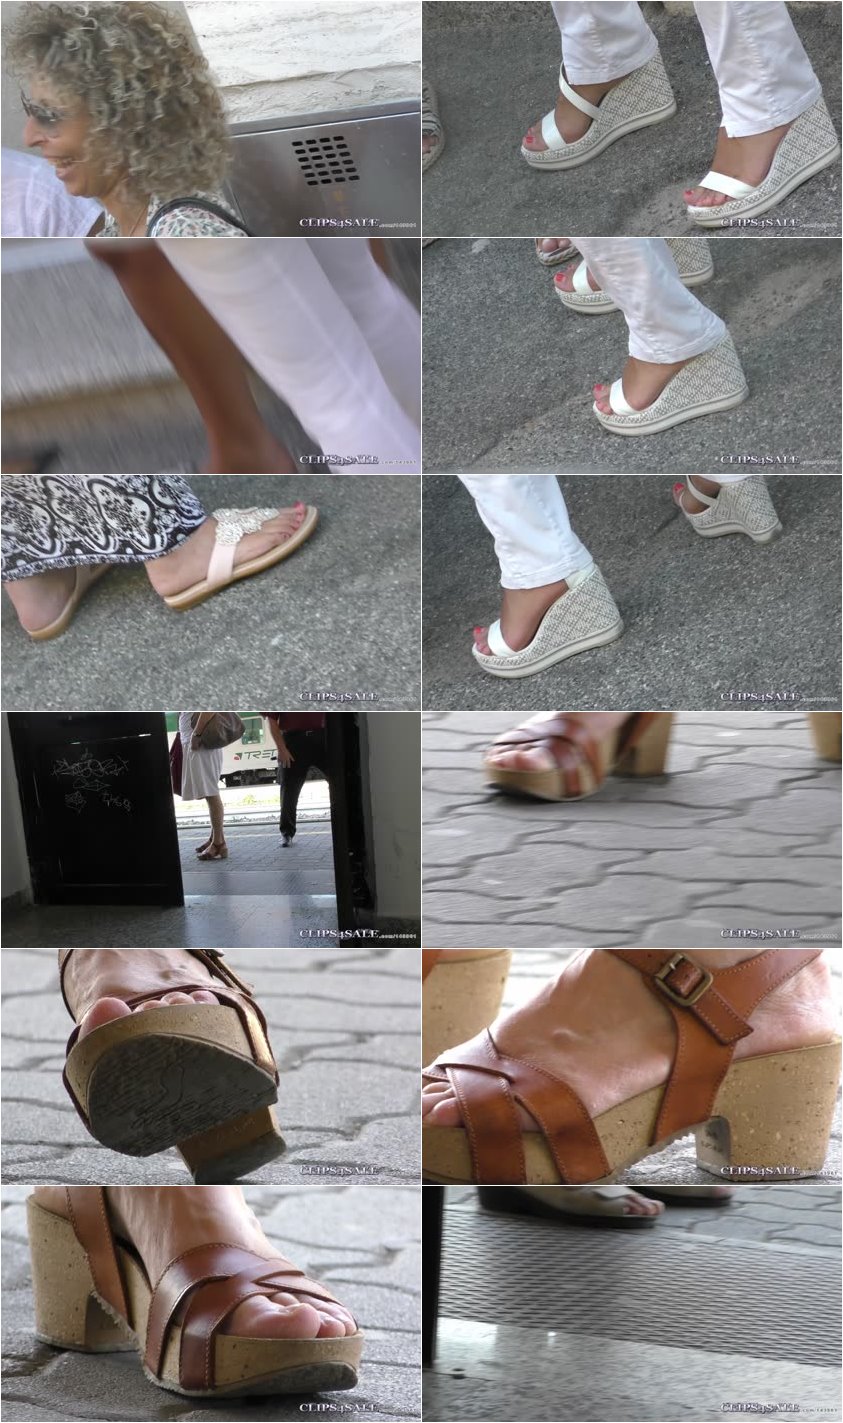 best of Feet shoes woman candid